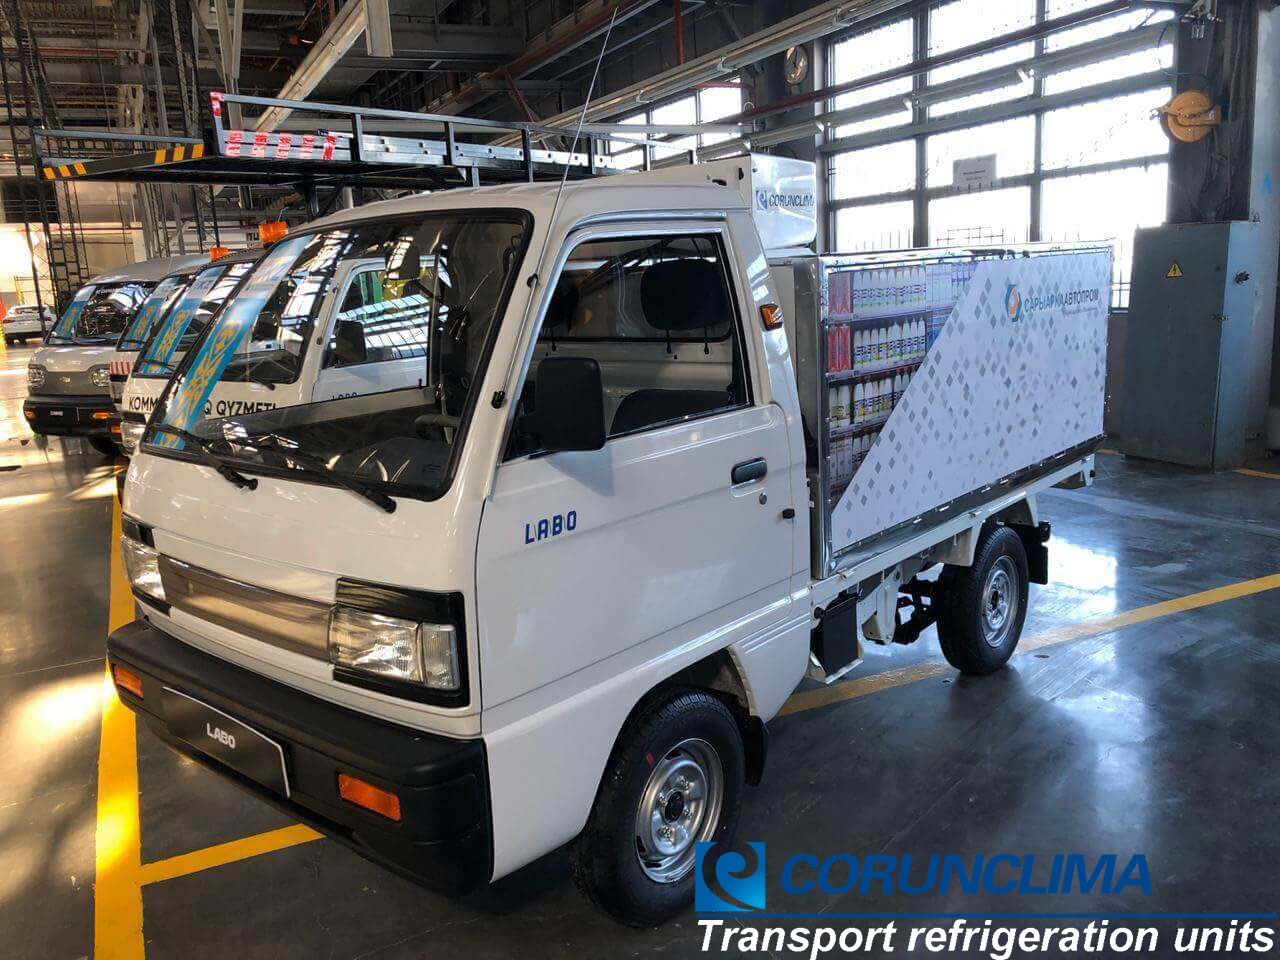 One OEM in central Asia use Corunclima refrigeration units C150F as parts of GM Labo micro truck